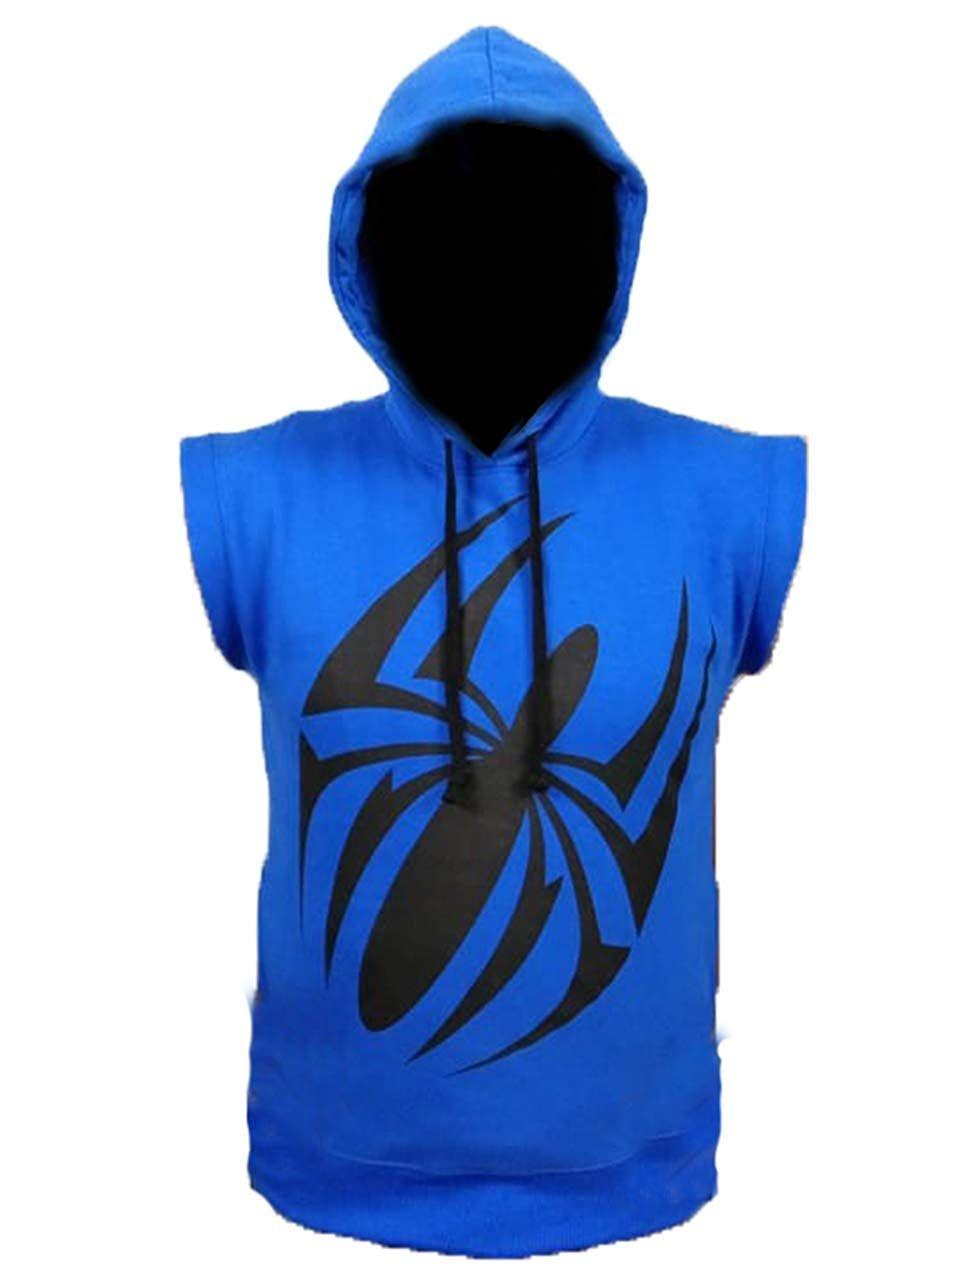 Blue Spider Logo - O&A COUTURE Men's Fashion Blue Spider Logo Sleeveless Hoodie Vest at